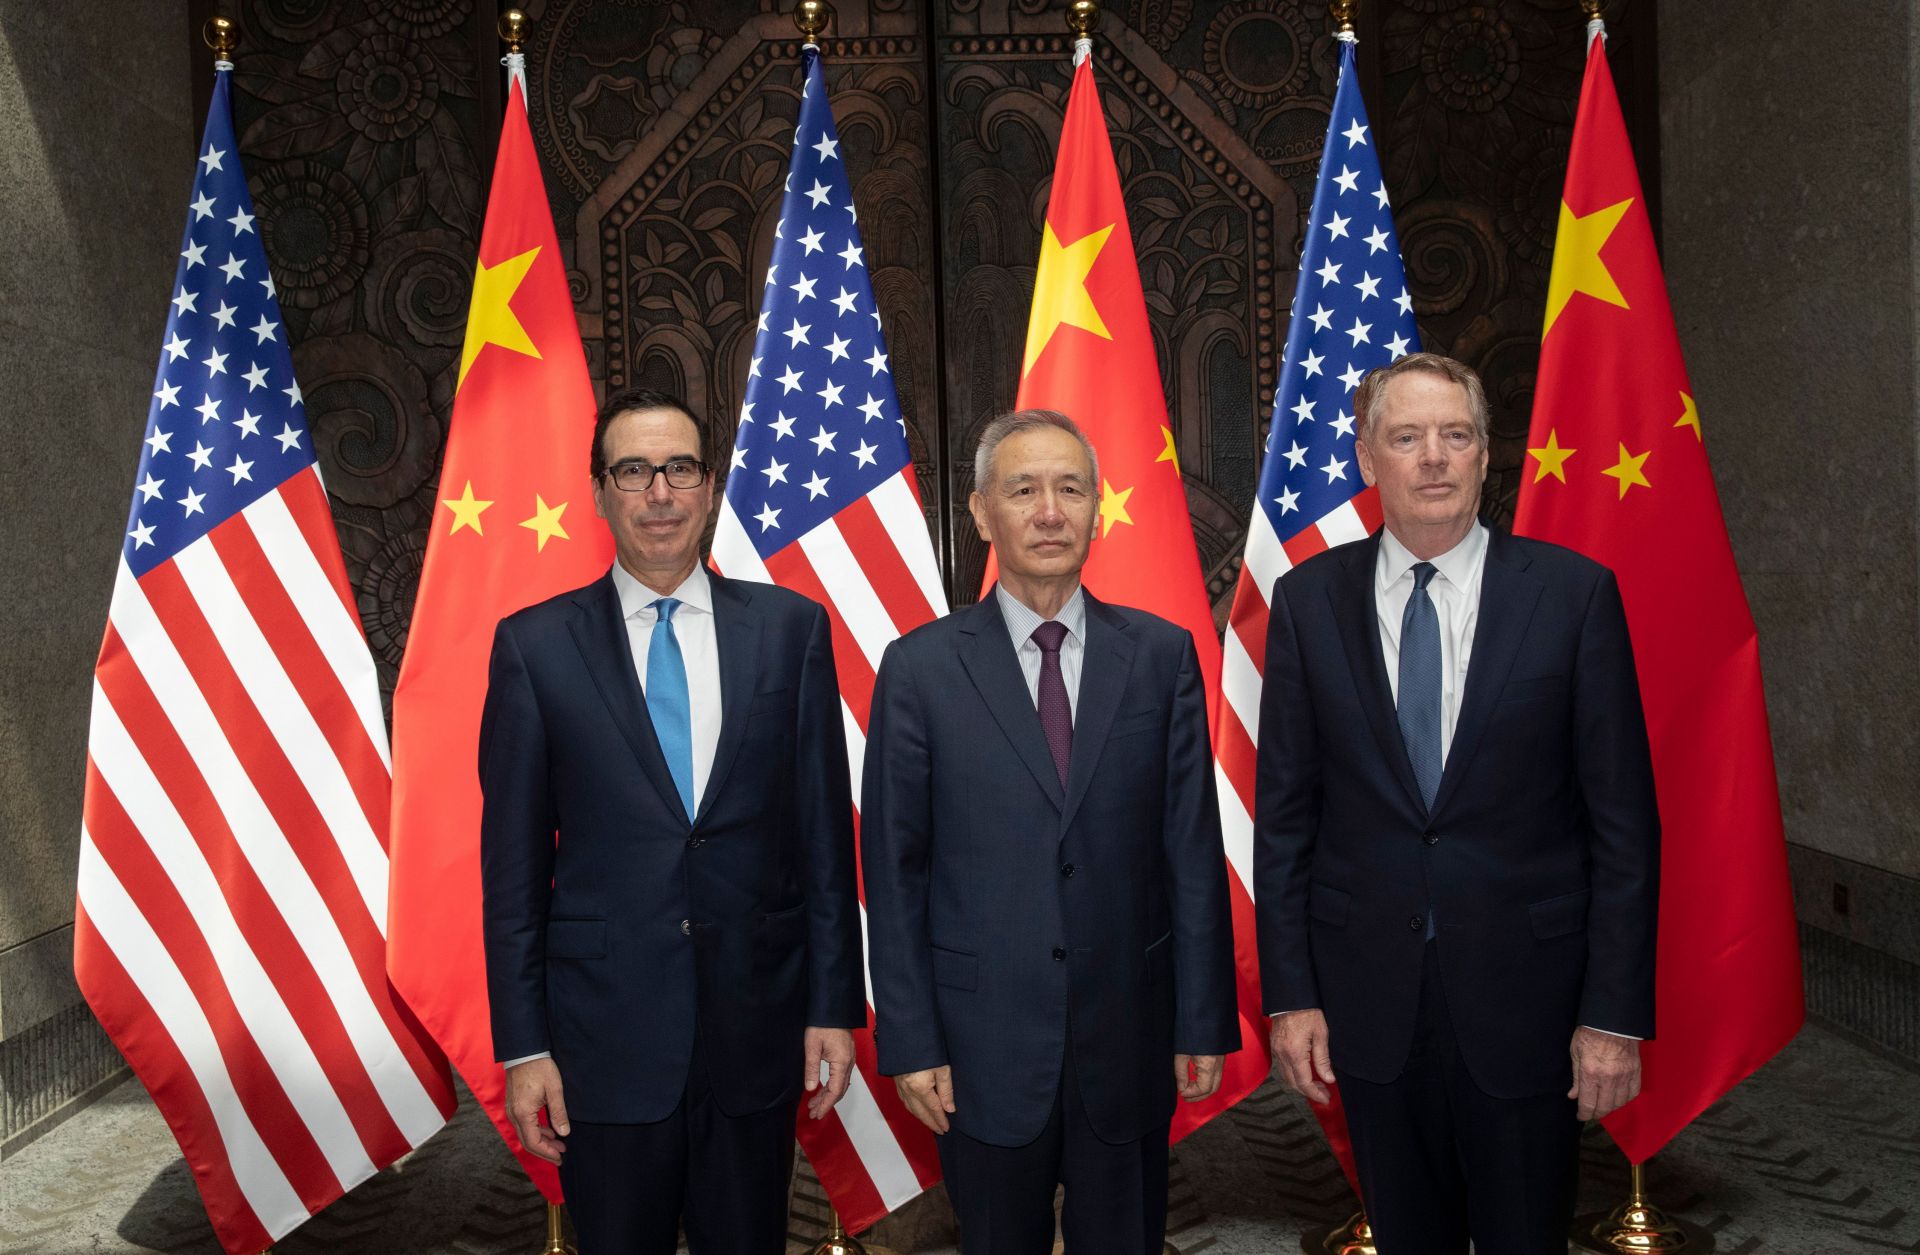 U.S. Treasury Secretary Steven Mnuchin (left) and U.S. Trade Representative Robert Lighthizer flank Chinese Vice Premier Liu He as they pose for photographs before holding trade talks in Shanghai on July 31, 2019.